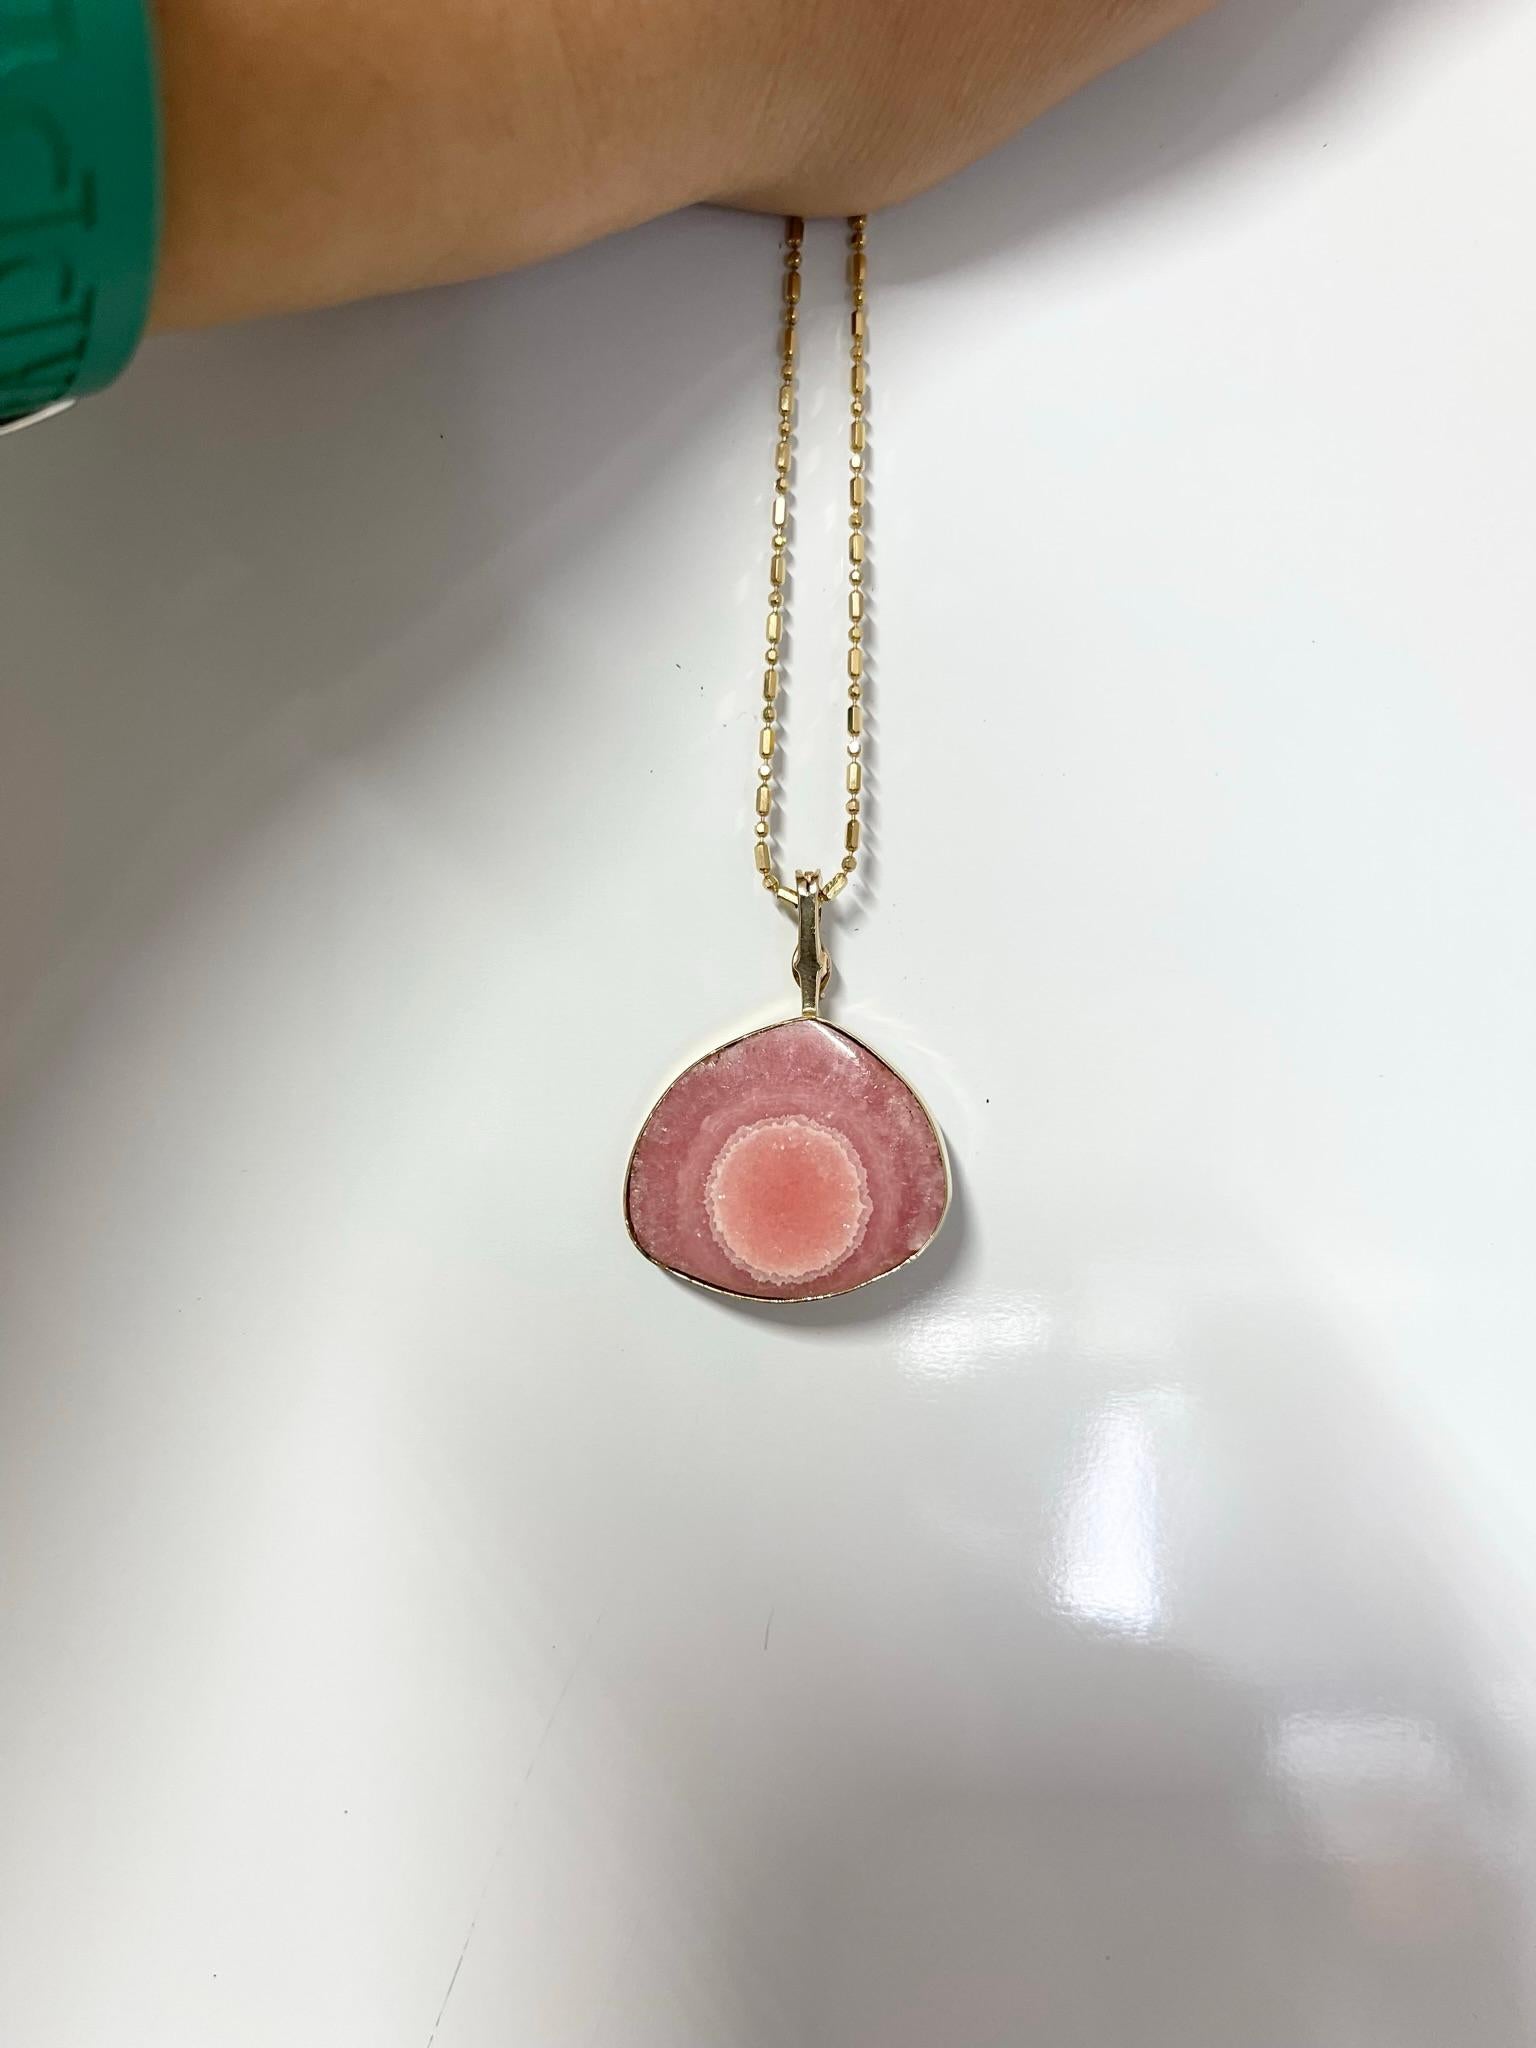 Agate 14KT Yellow Gold Pendant Necklace Pink Pendant Trillion Necklace In Good Condition For Sale In Jupiter, FL